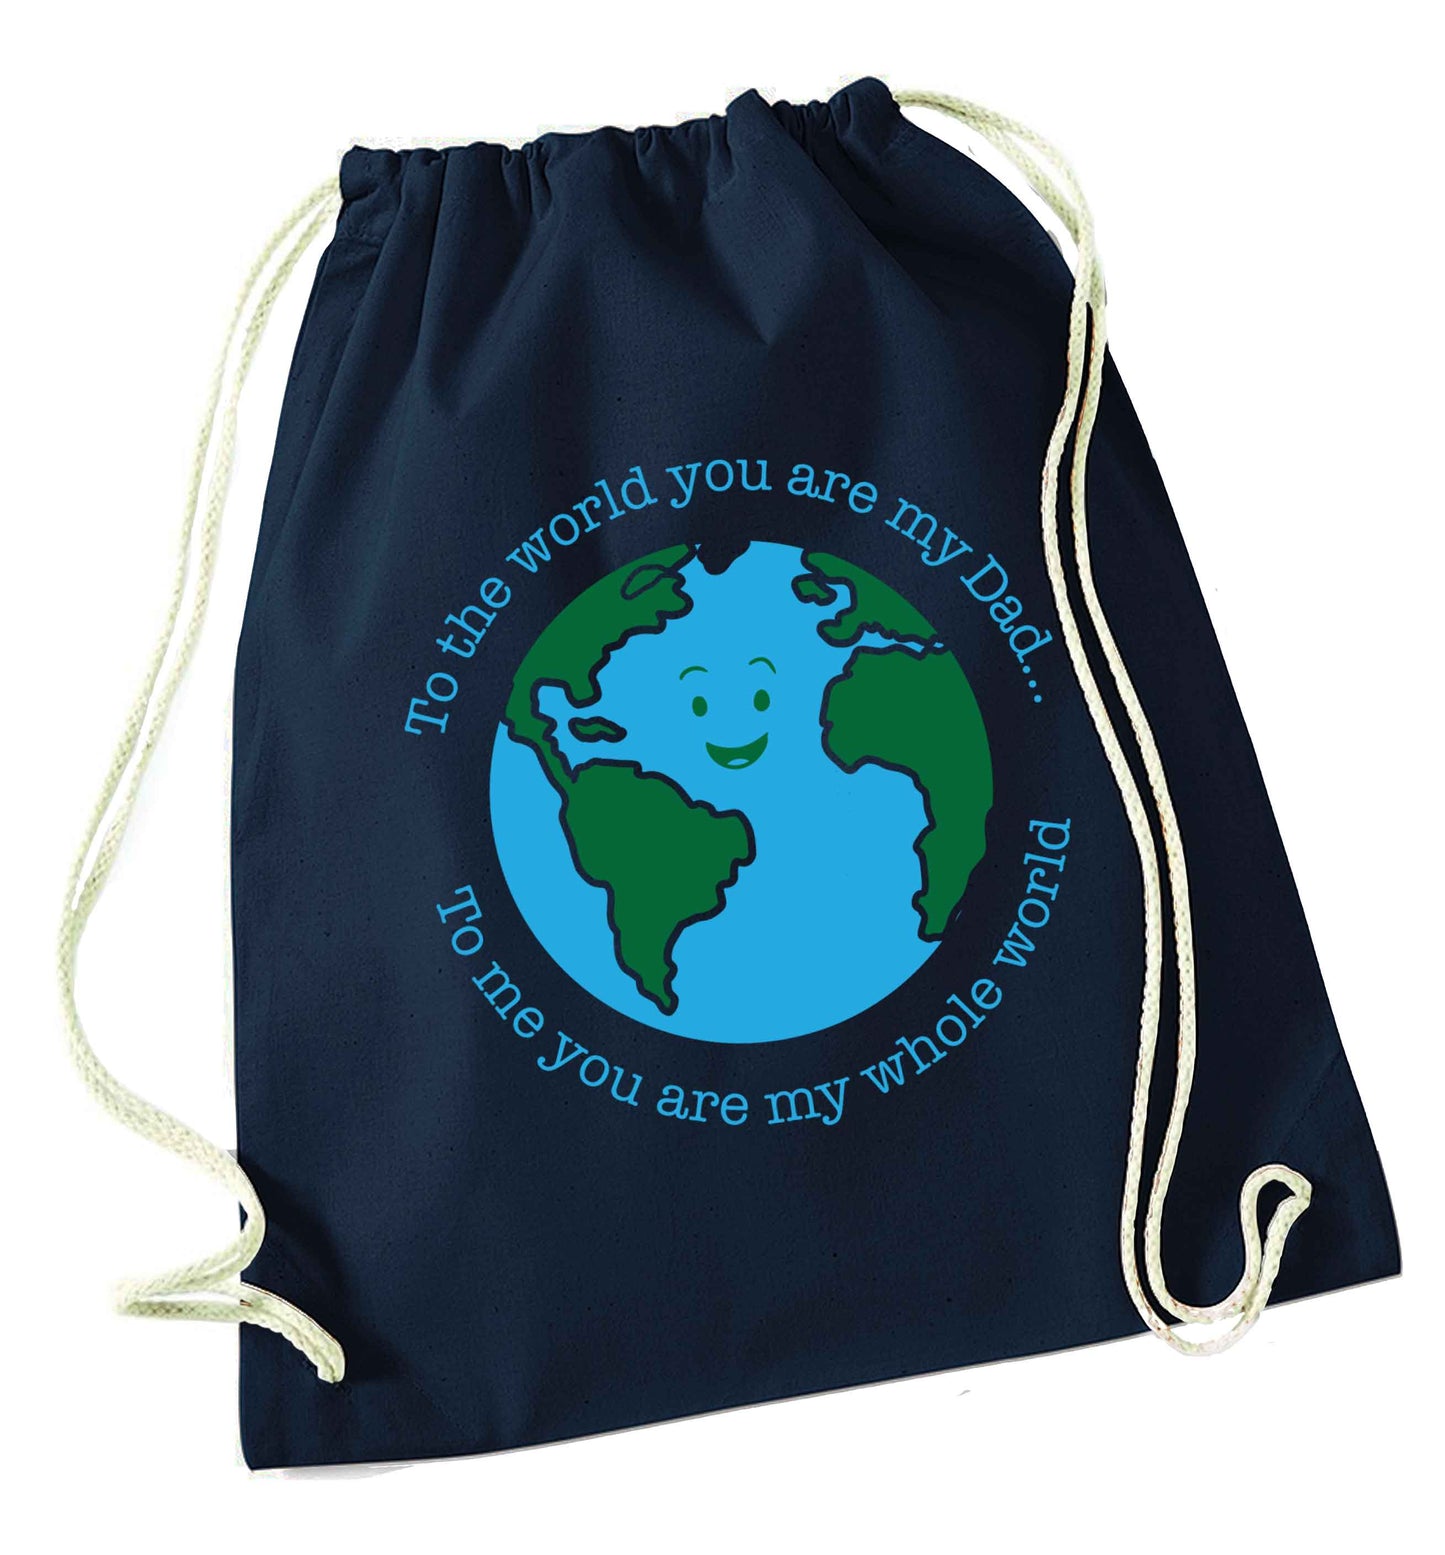 To the world you are my dad, to me you are my whole world navy drawstring bag